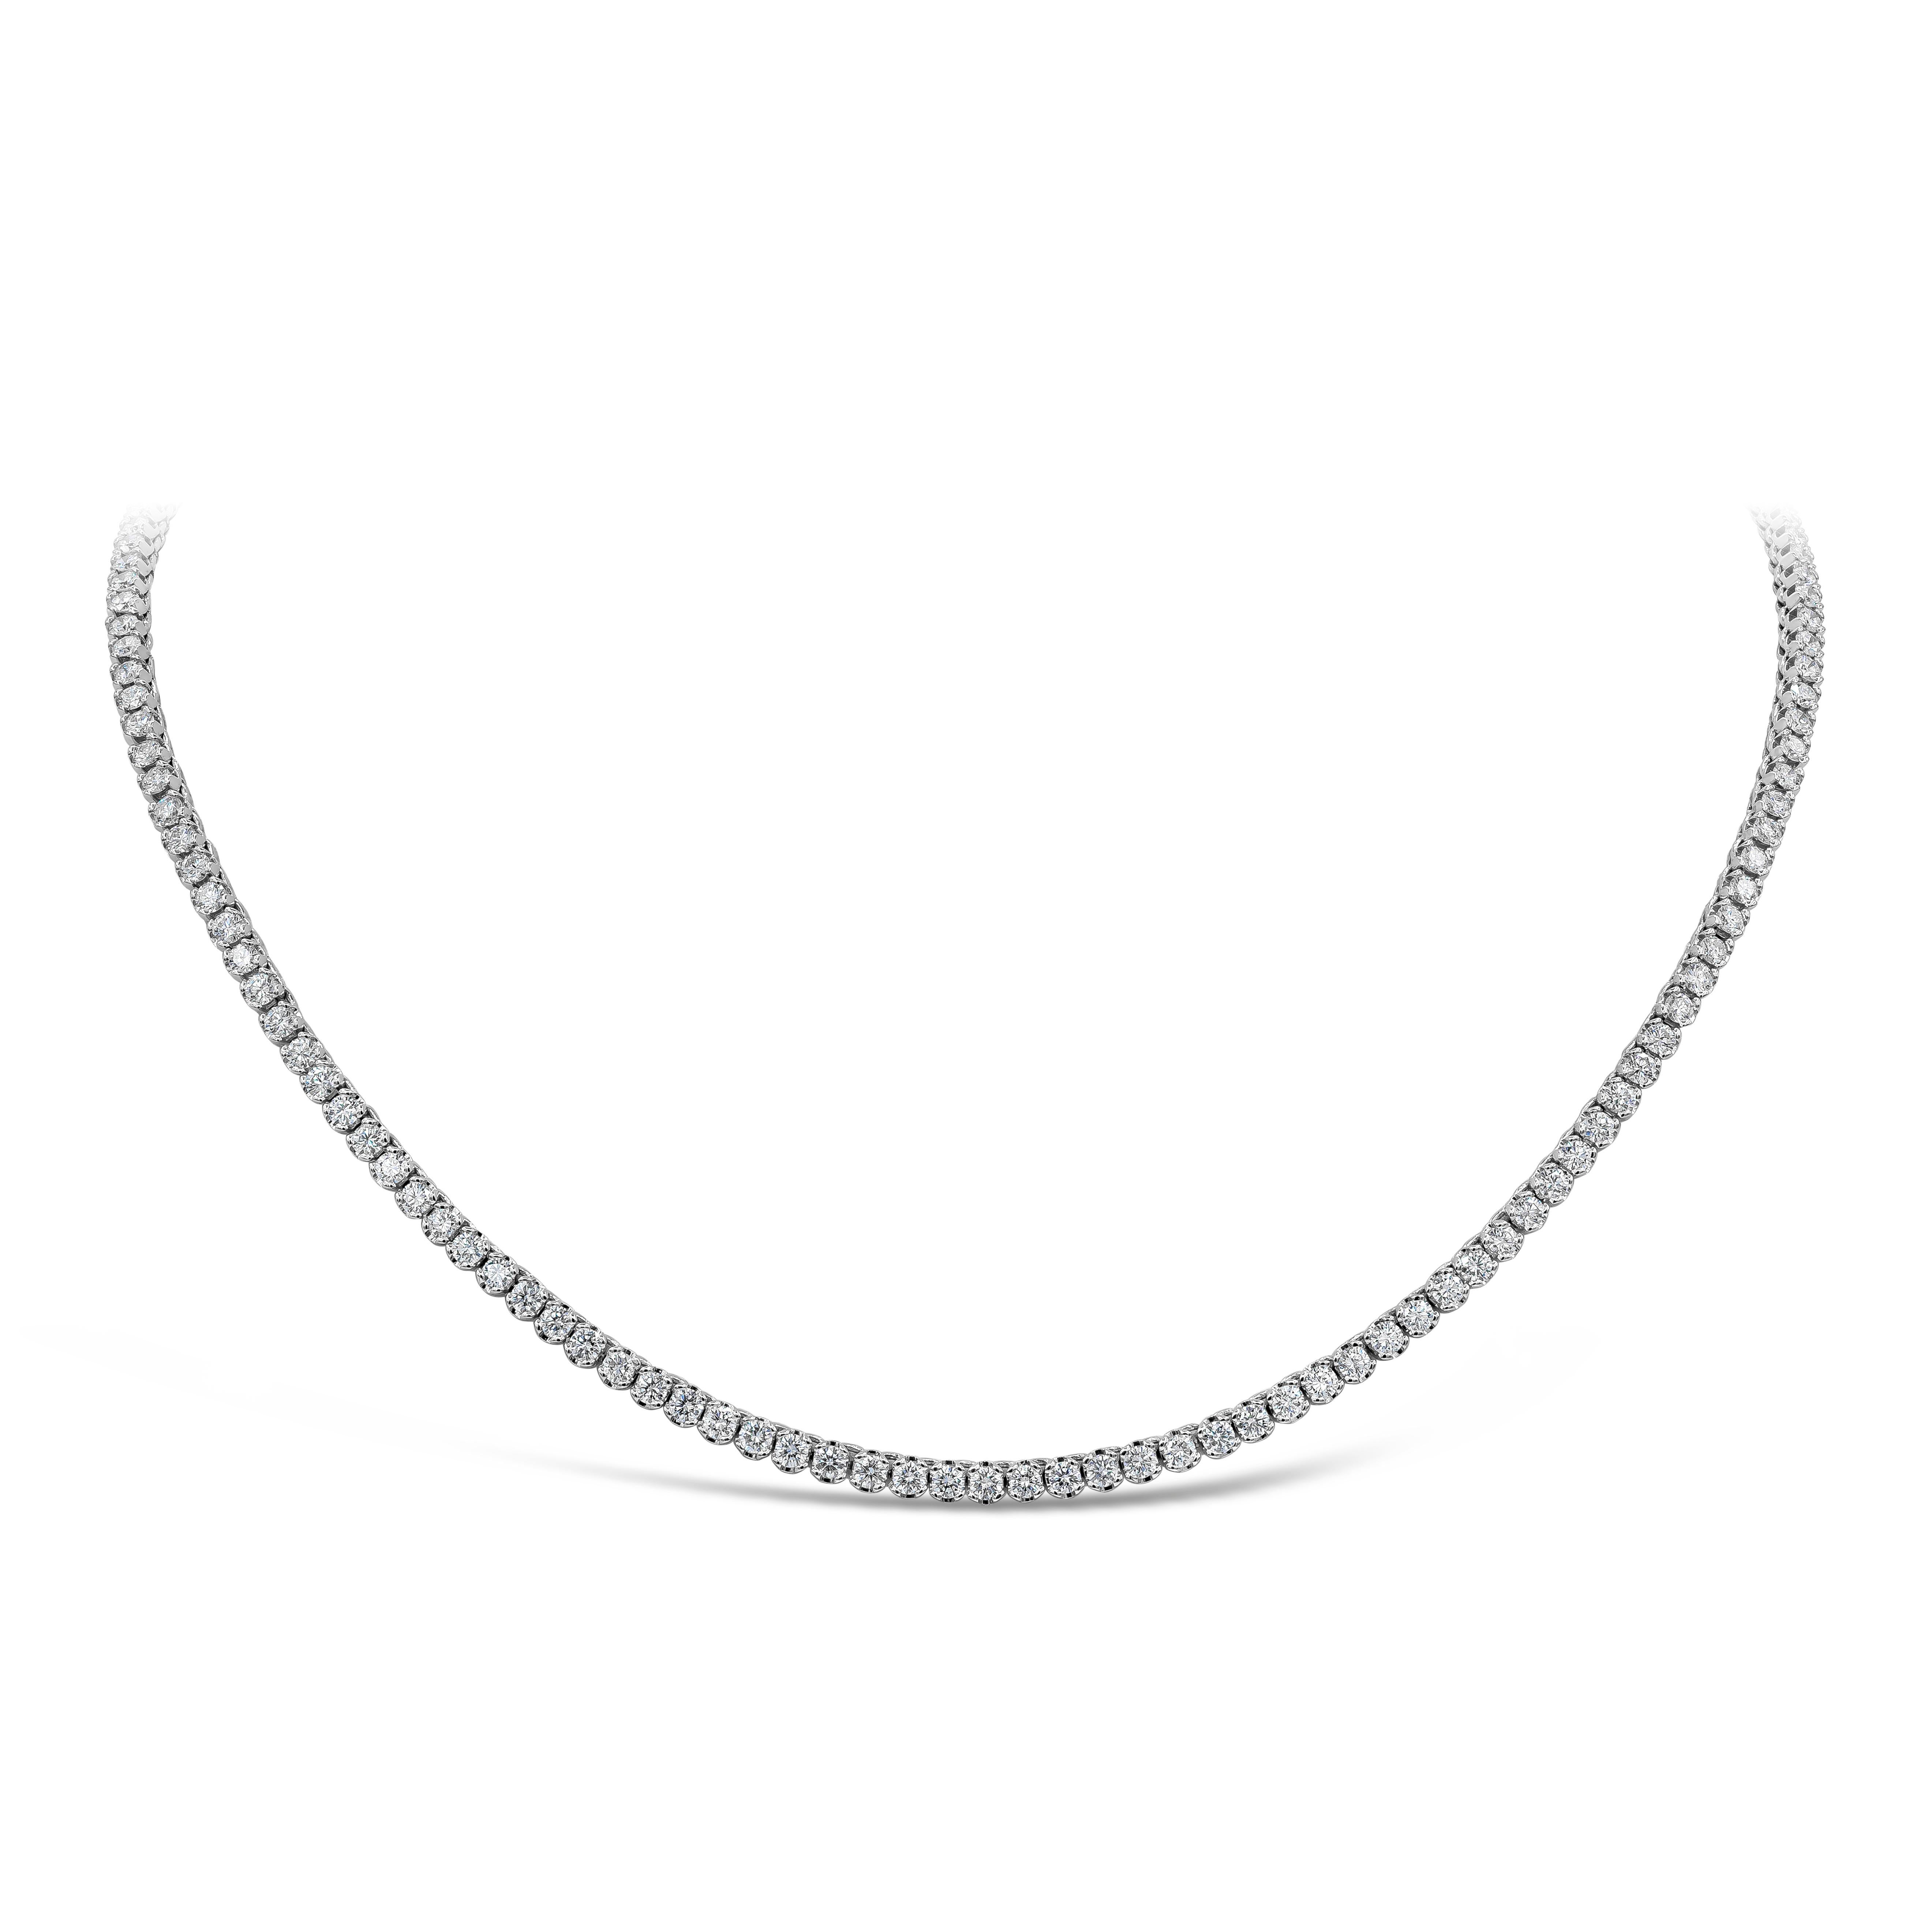 A versatile piece of jewelry, showcasing a row of round brilliant cut diamonds weighing 9.80 carats total with F color and VS-SI1 clarity. Set on a classic four prong setting made of 18K white gold. This tennis necklace is 17.5 inches in length.
